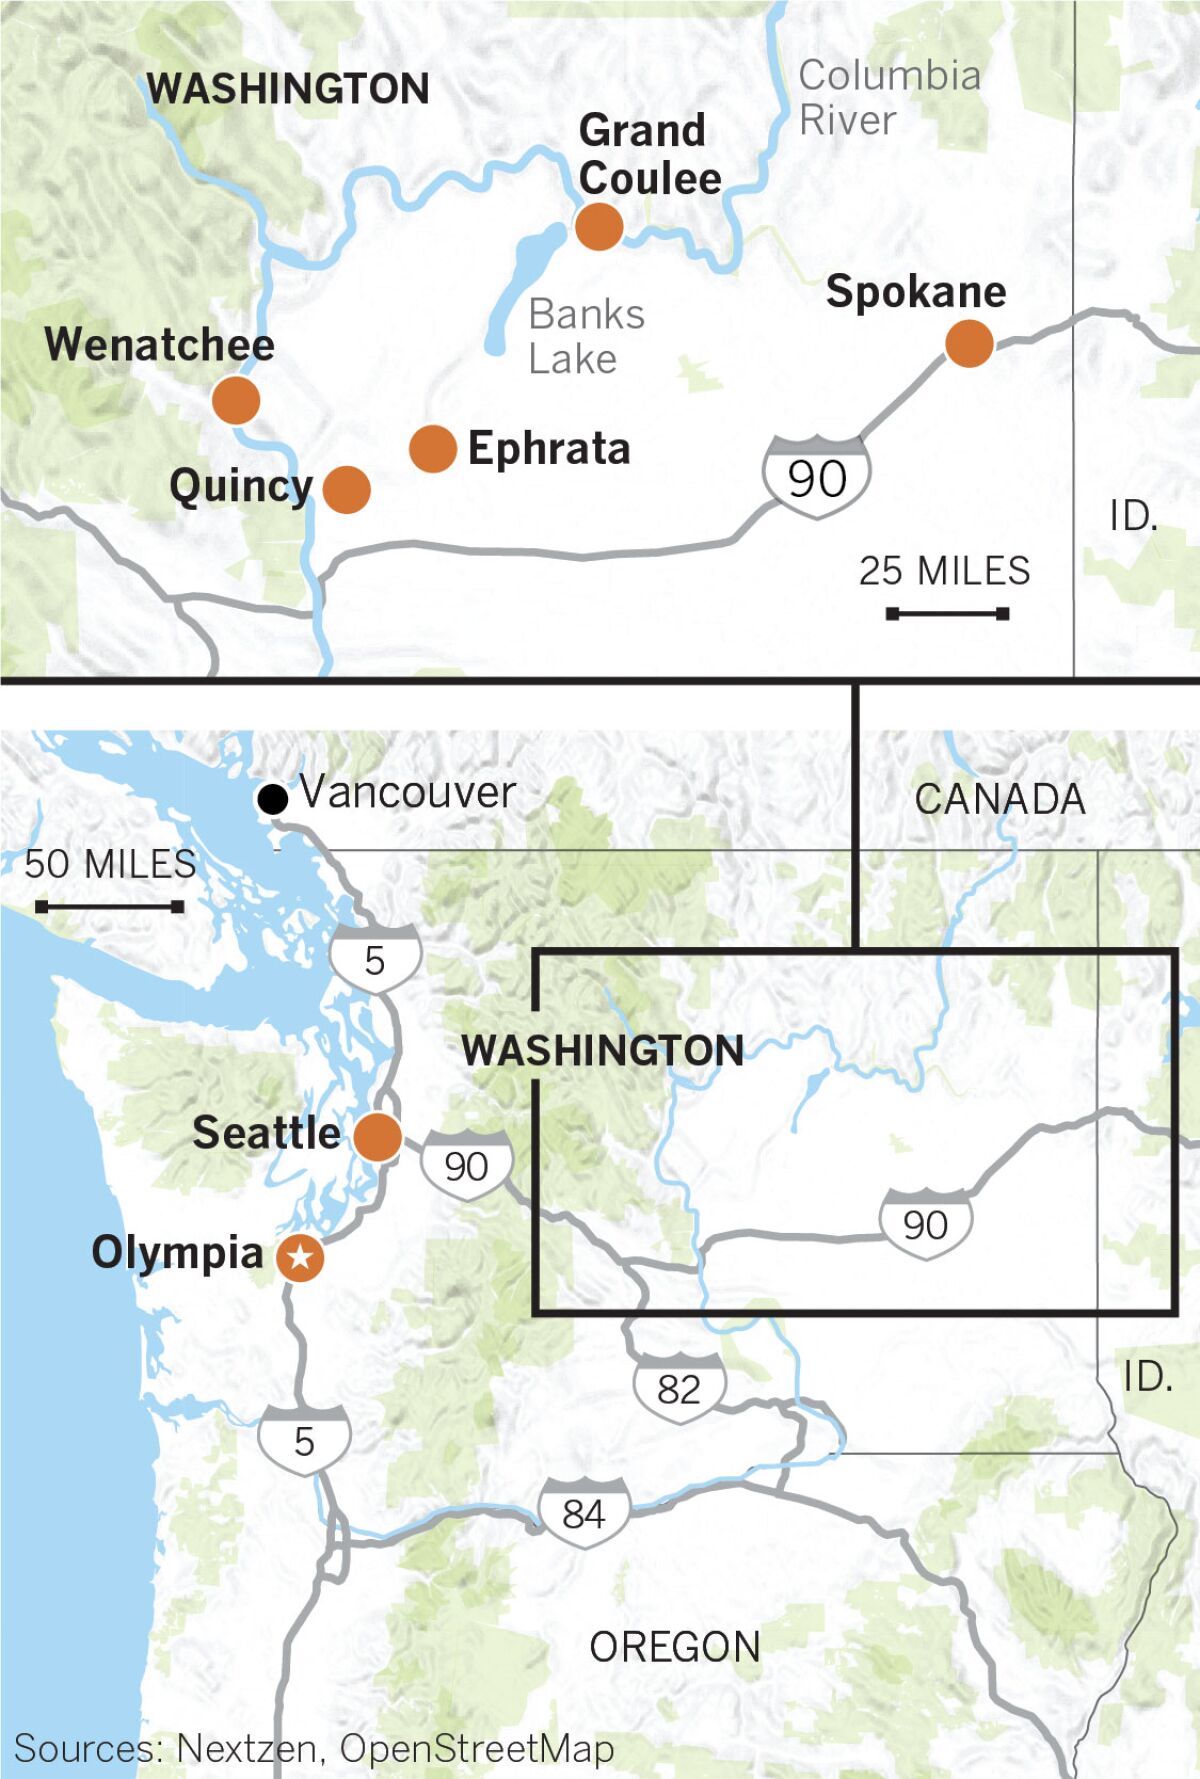 Map of eastern Washington showing Spokane, Ephrata, Quincy, Grand Coulee, Wenatchee, Seattle and Olympia.